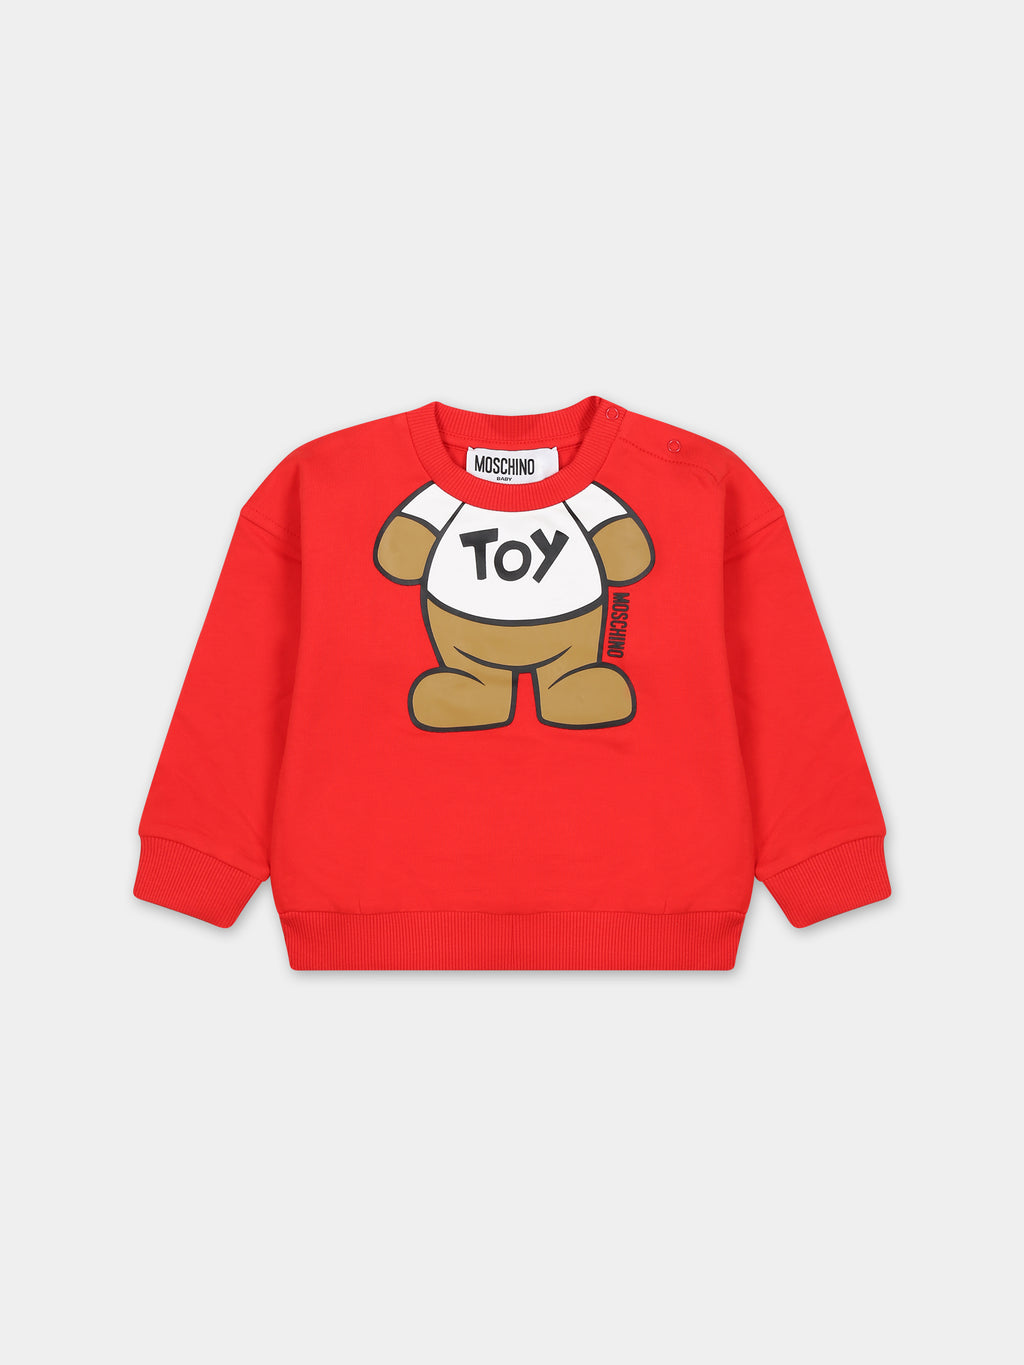 Red sweatshirt for babies with Teddy Bear